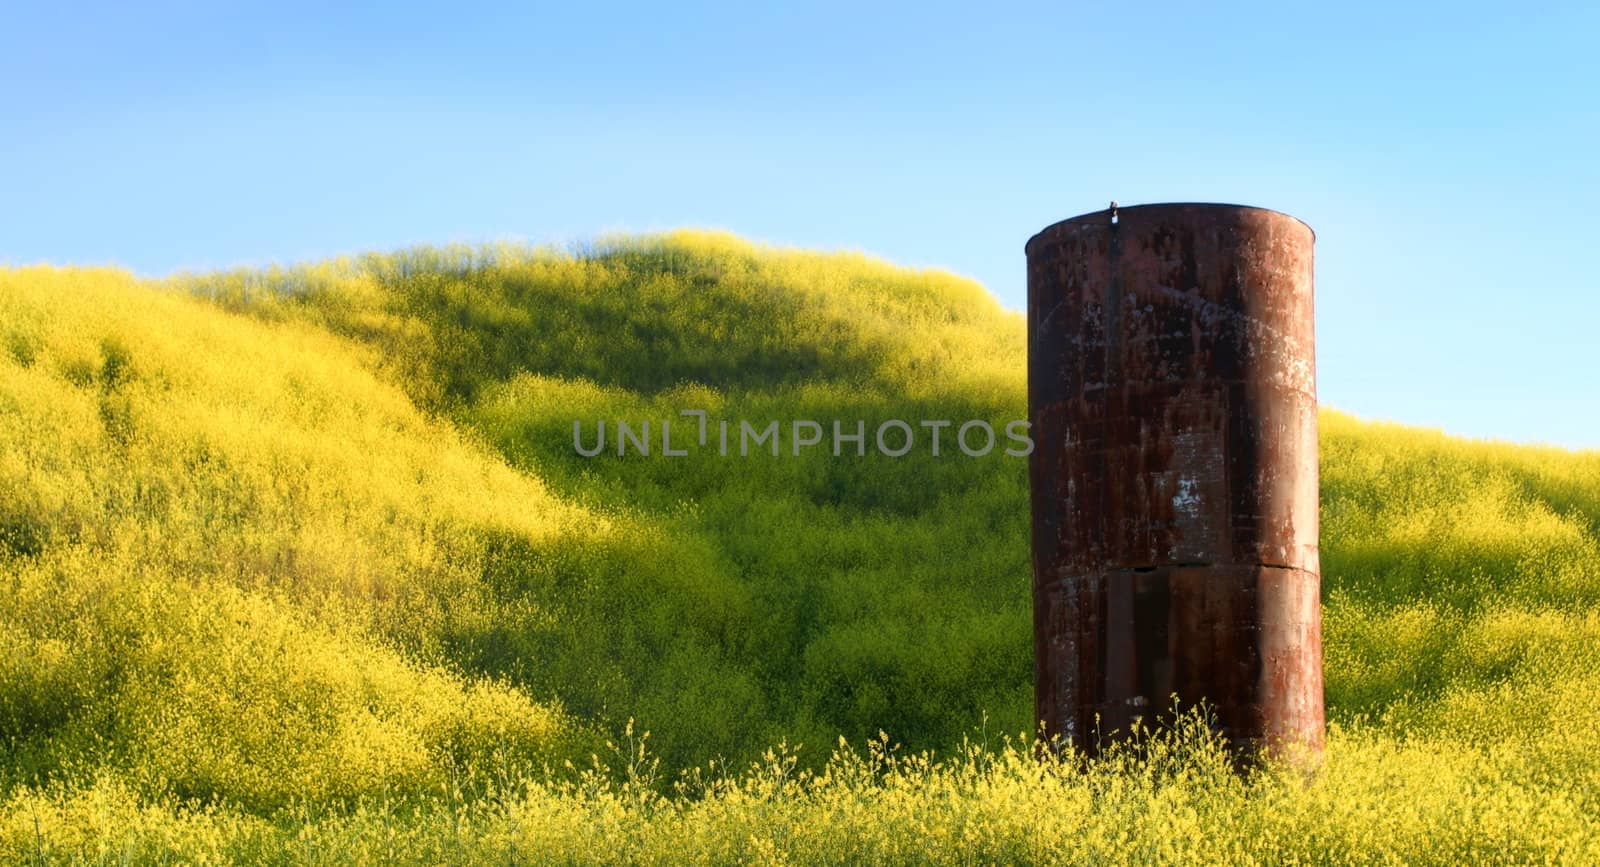 Silo in the middle of yellow mustard